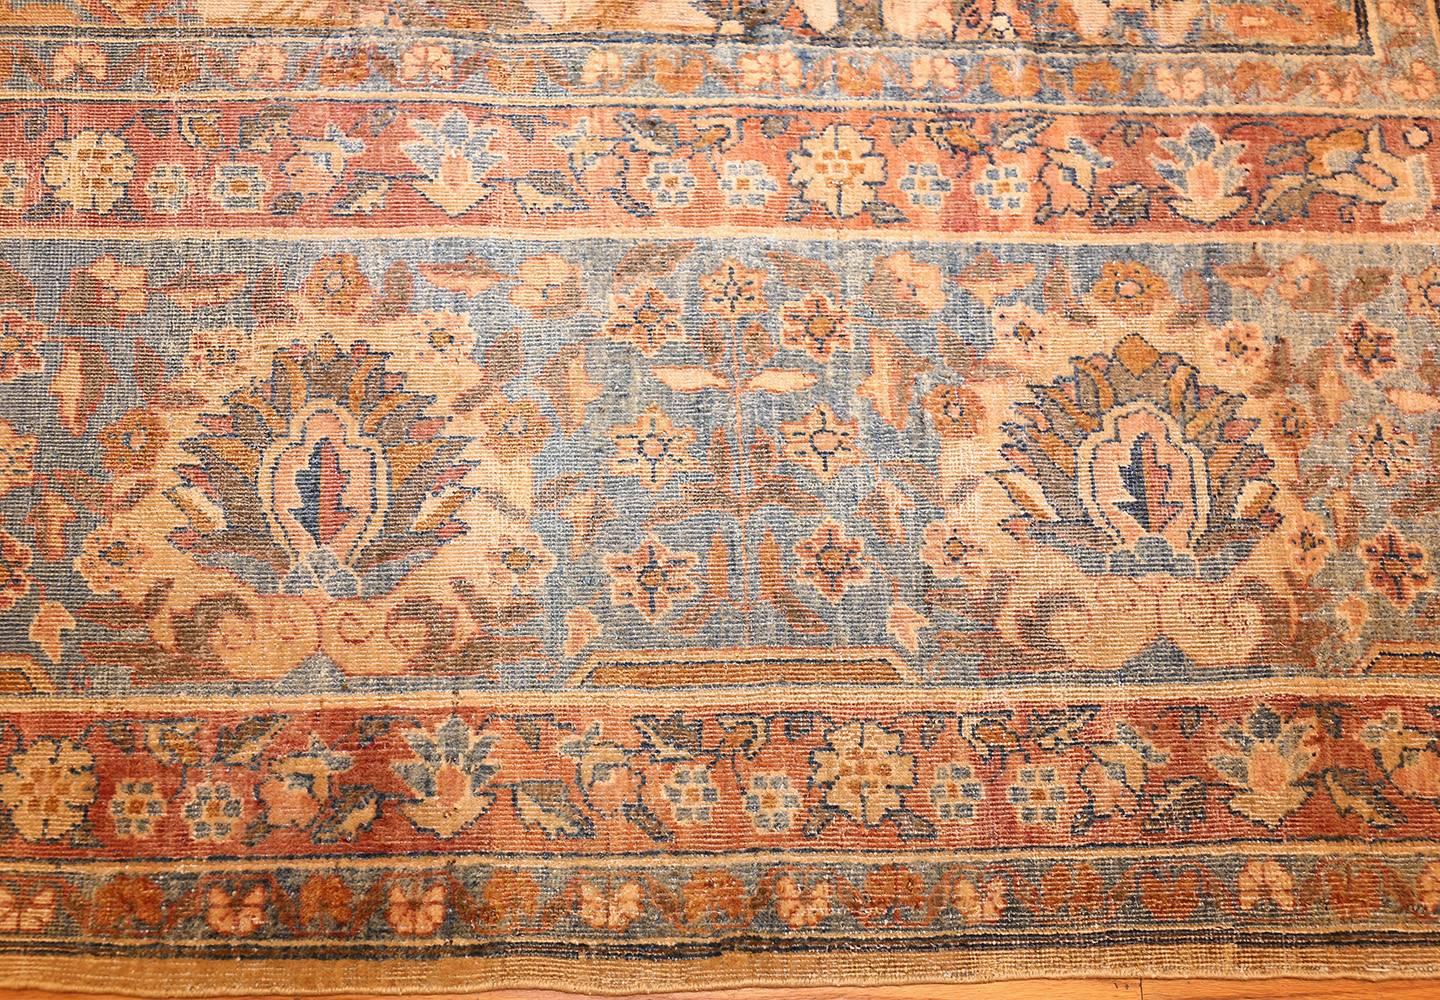 Hand-Knotted Decorative and Rare Square Size Persian Antique Tabriz Rug. Size: 14' x 14' 6